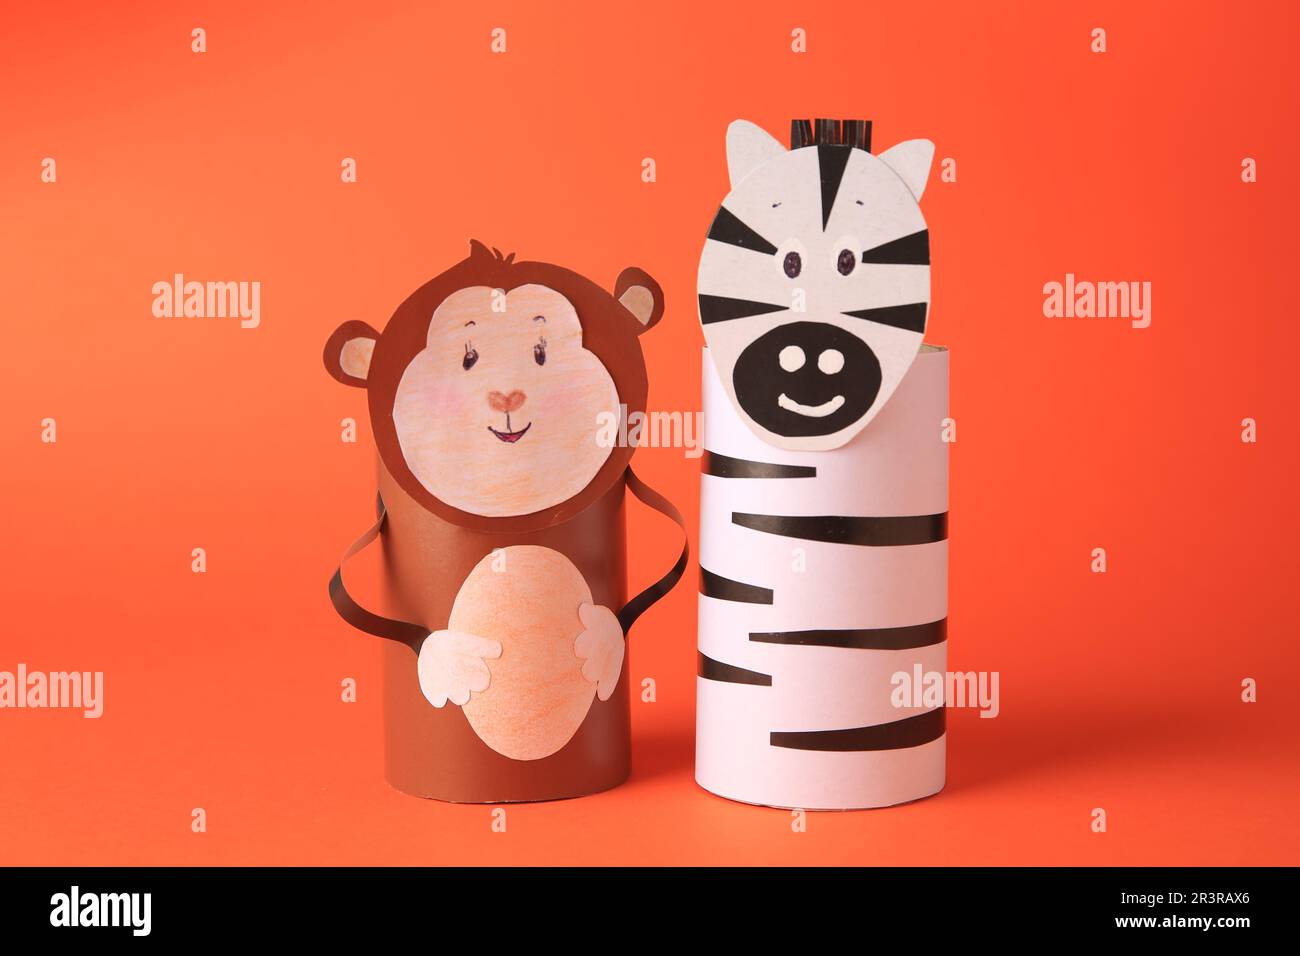 Toy monkey and zebra made from toilet paper hubs on orange background. Children's handmade ideas Stock Photo